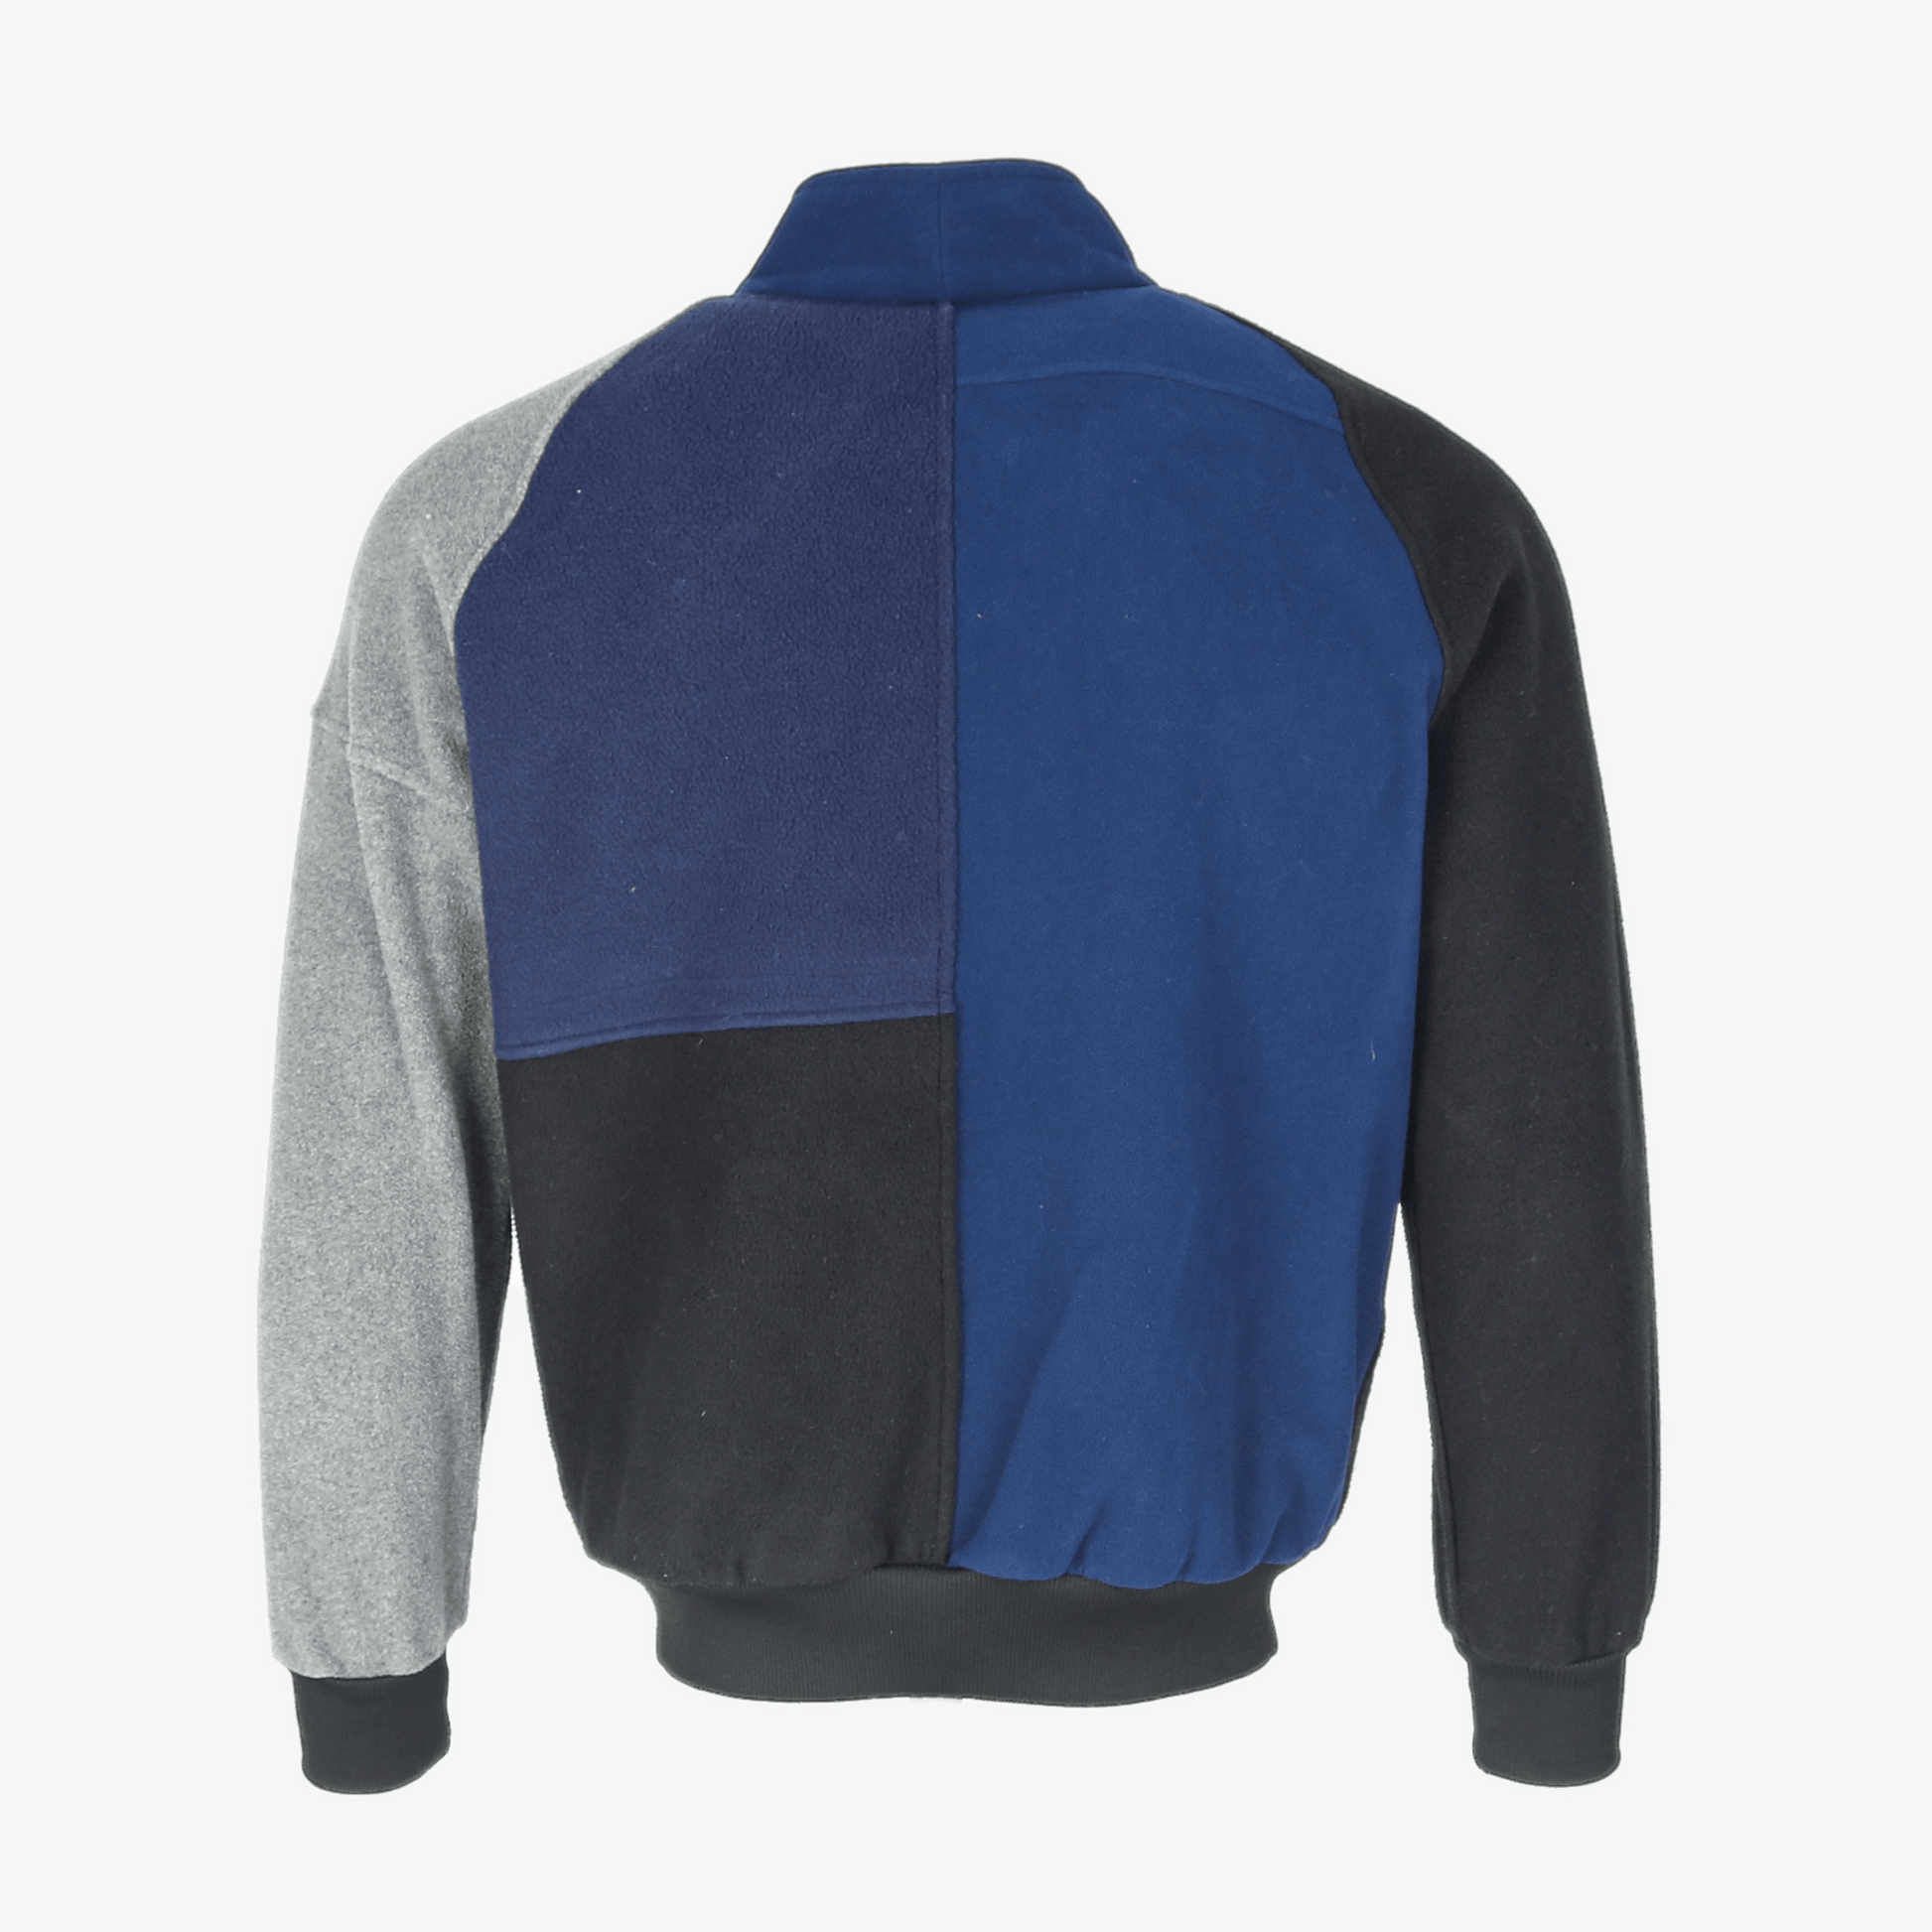 Re-Worked Patagonia Fleece #9 - American Madness